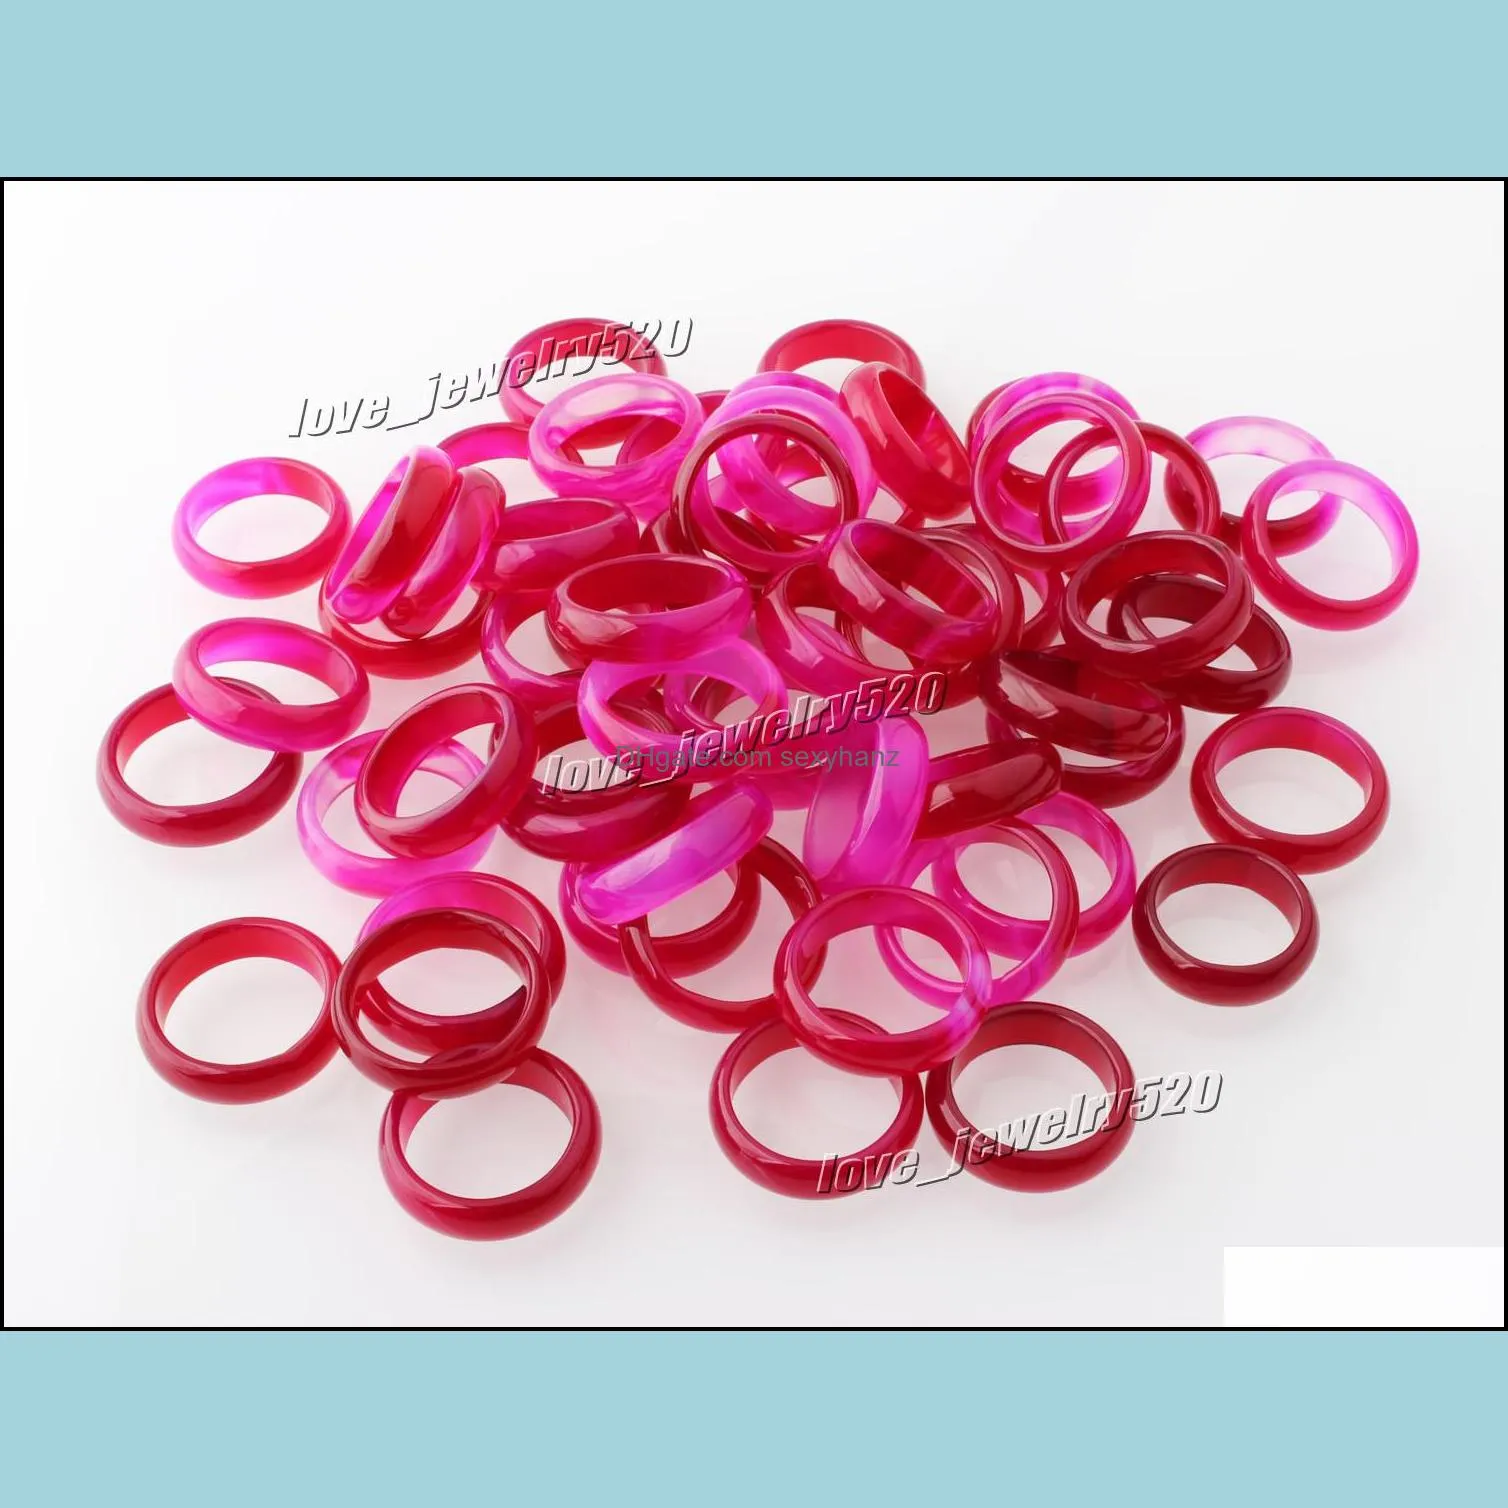 new beautiful smooth roseo round solid jade/agate gem stone band rings 6 mm - great value 20pcs lots